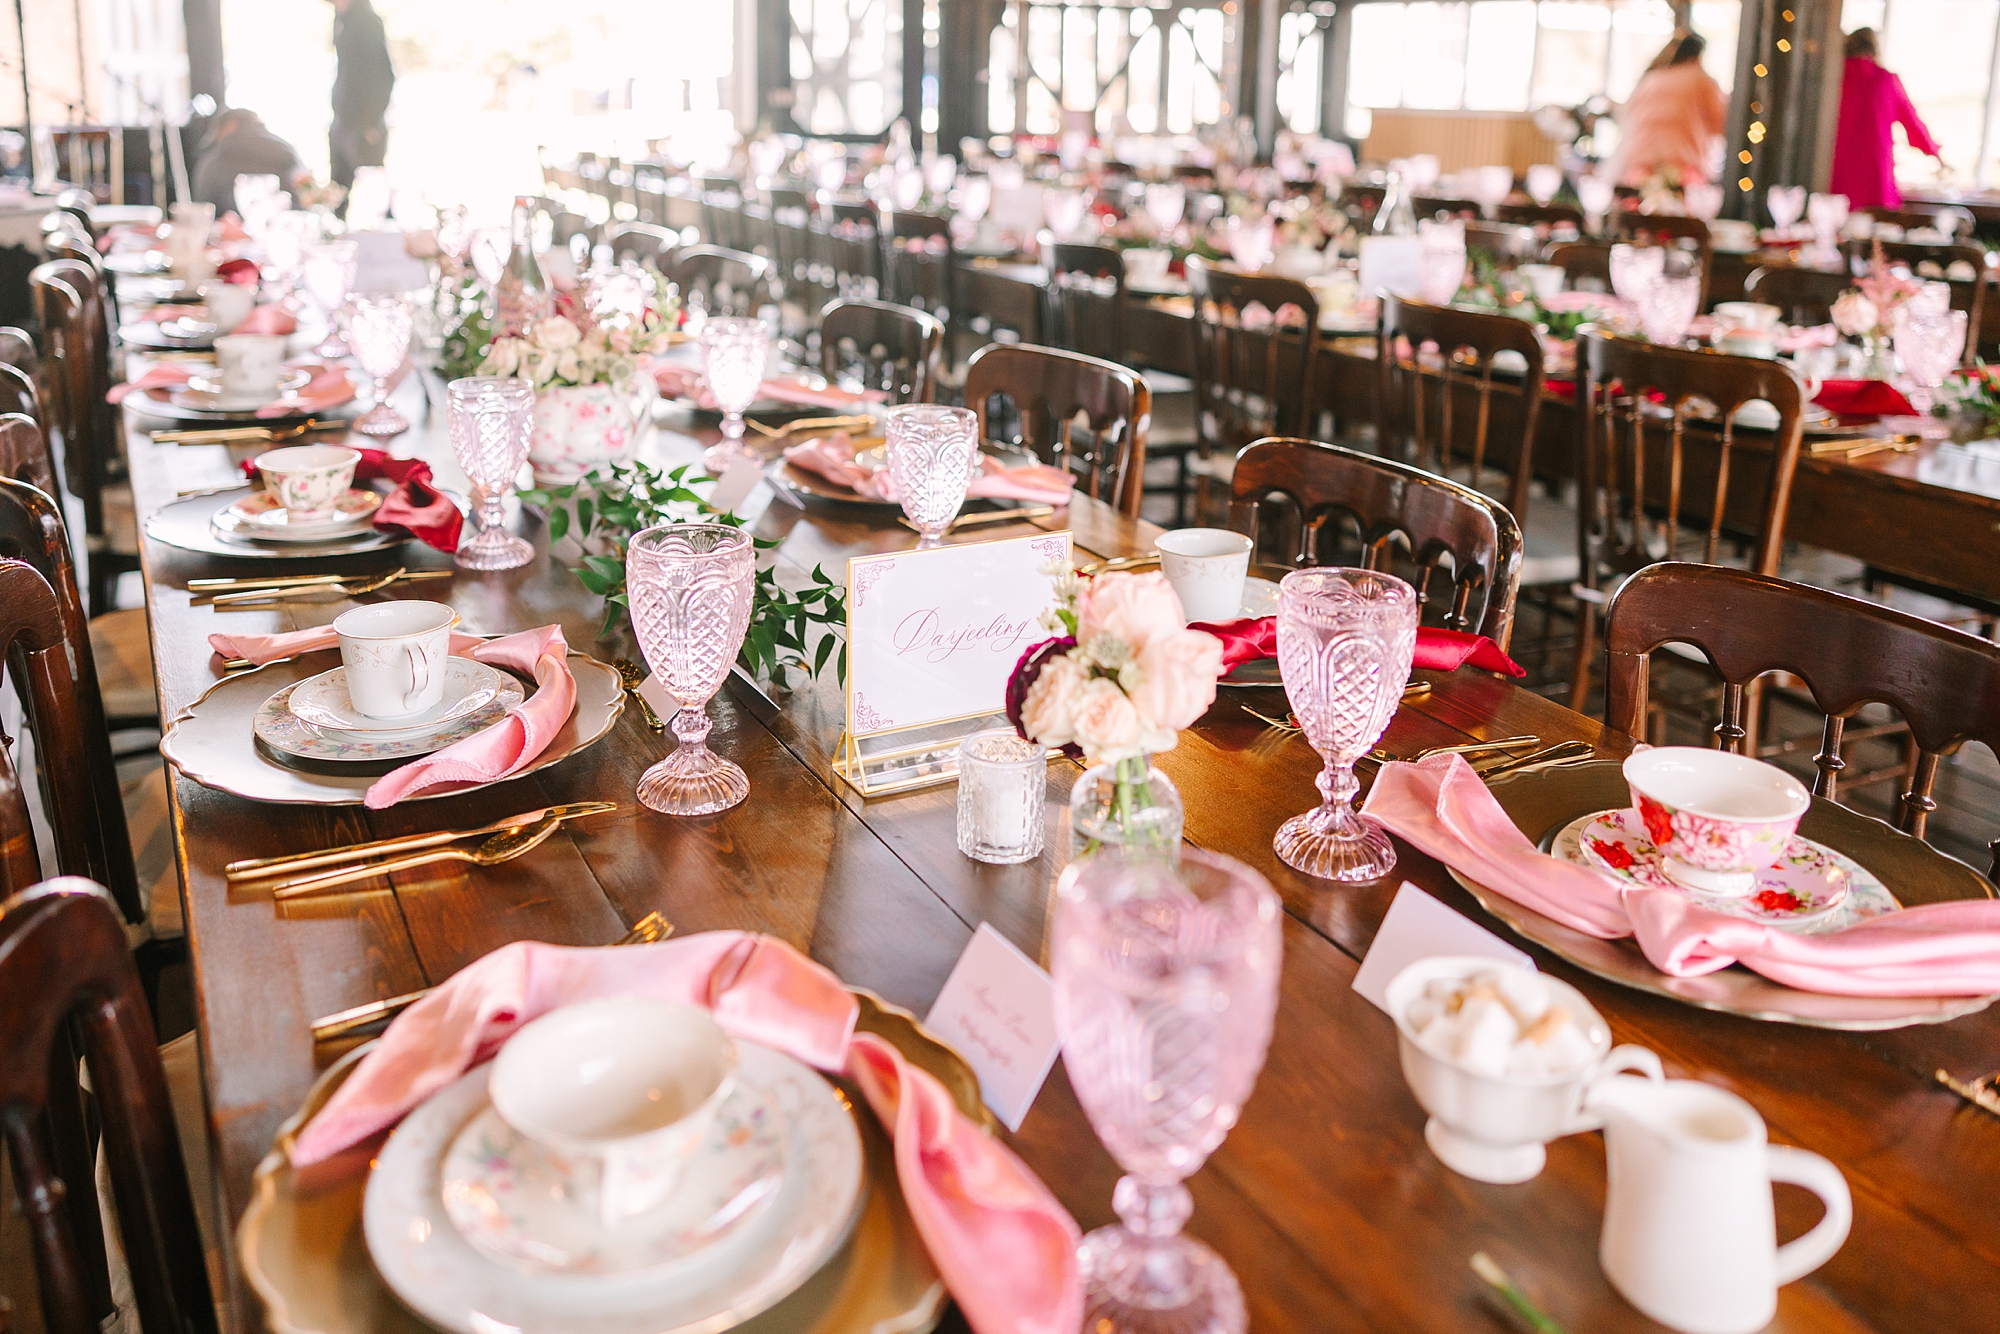 place settings with pink napkins and vintage pink glasses